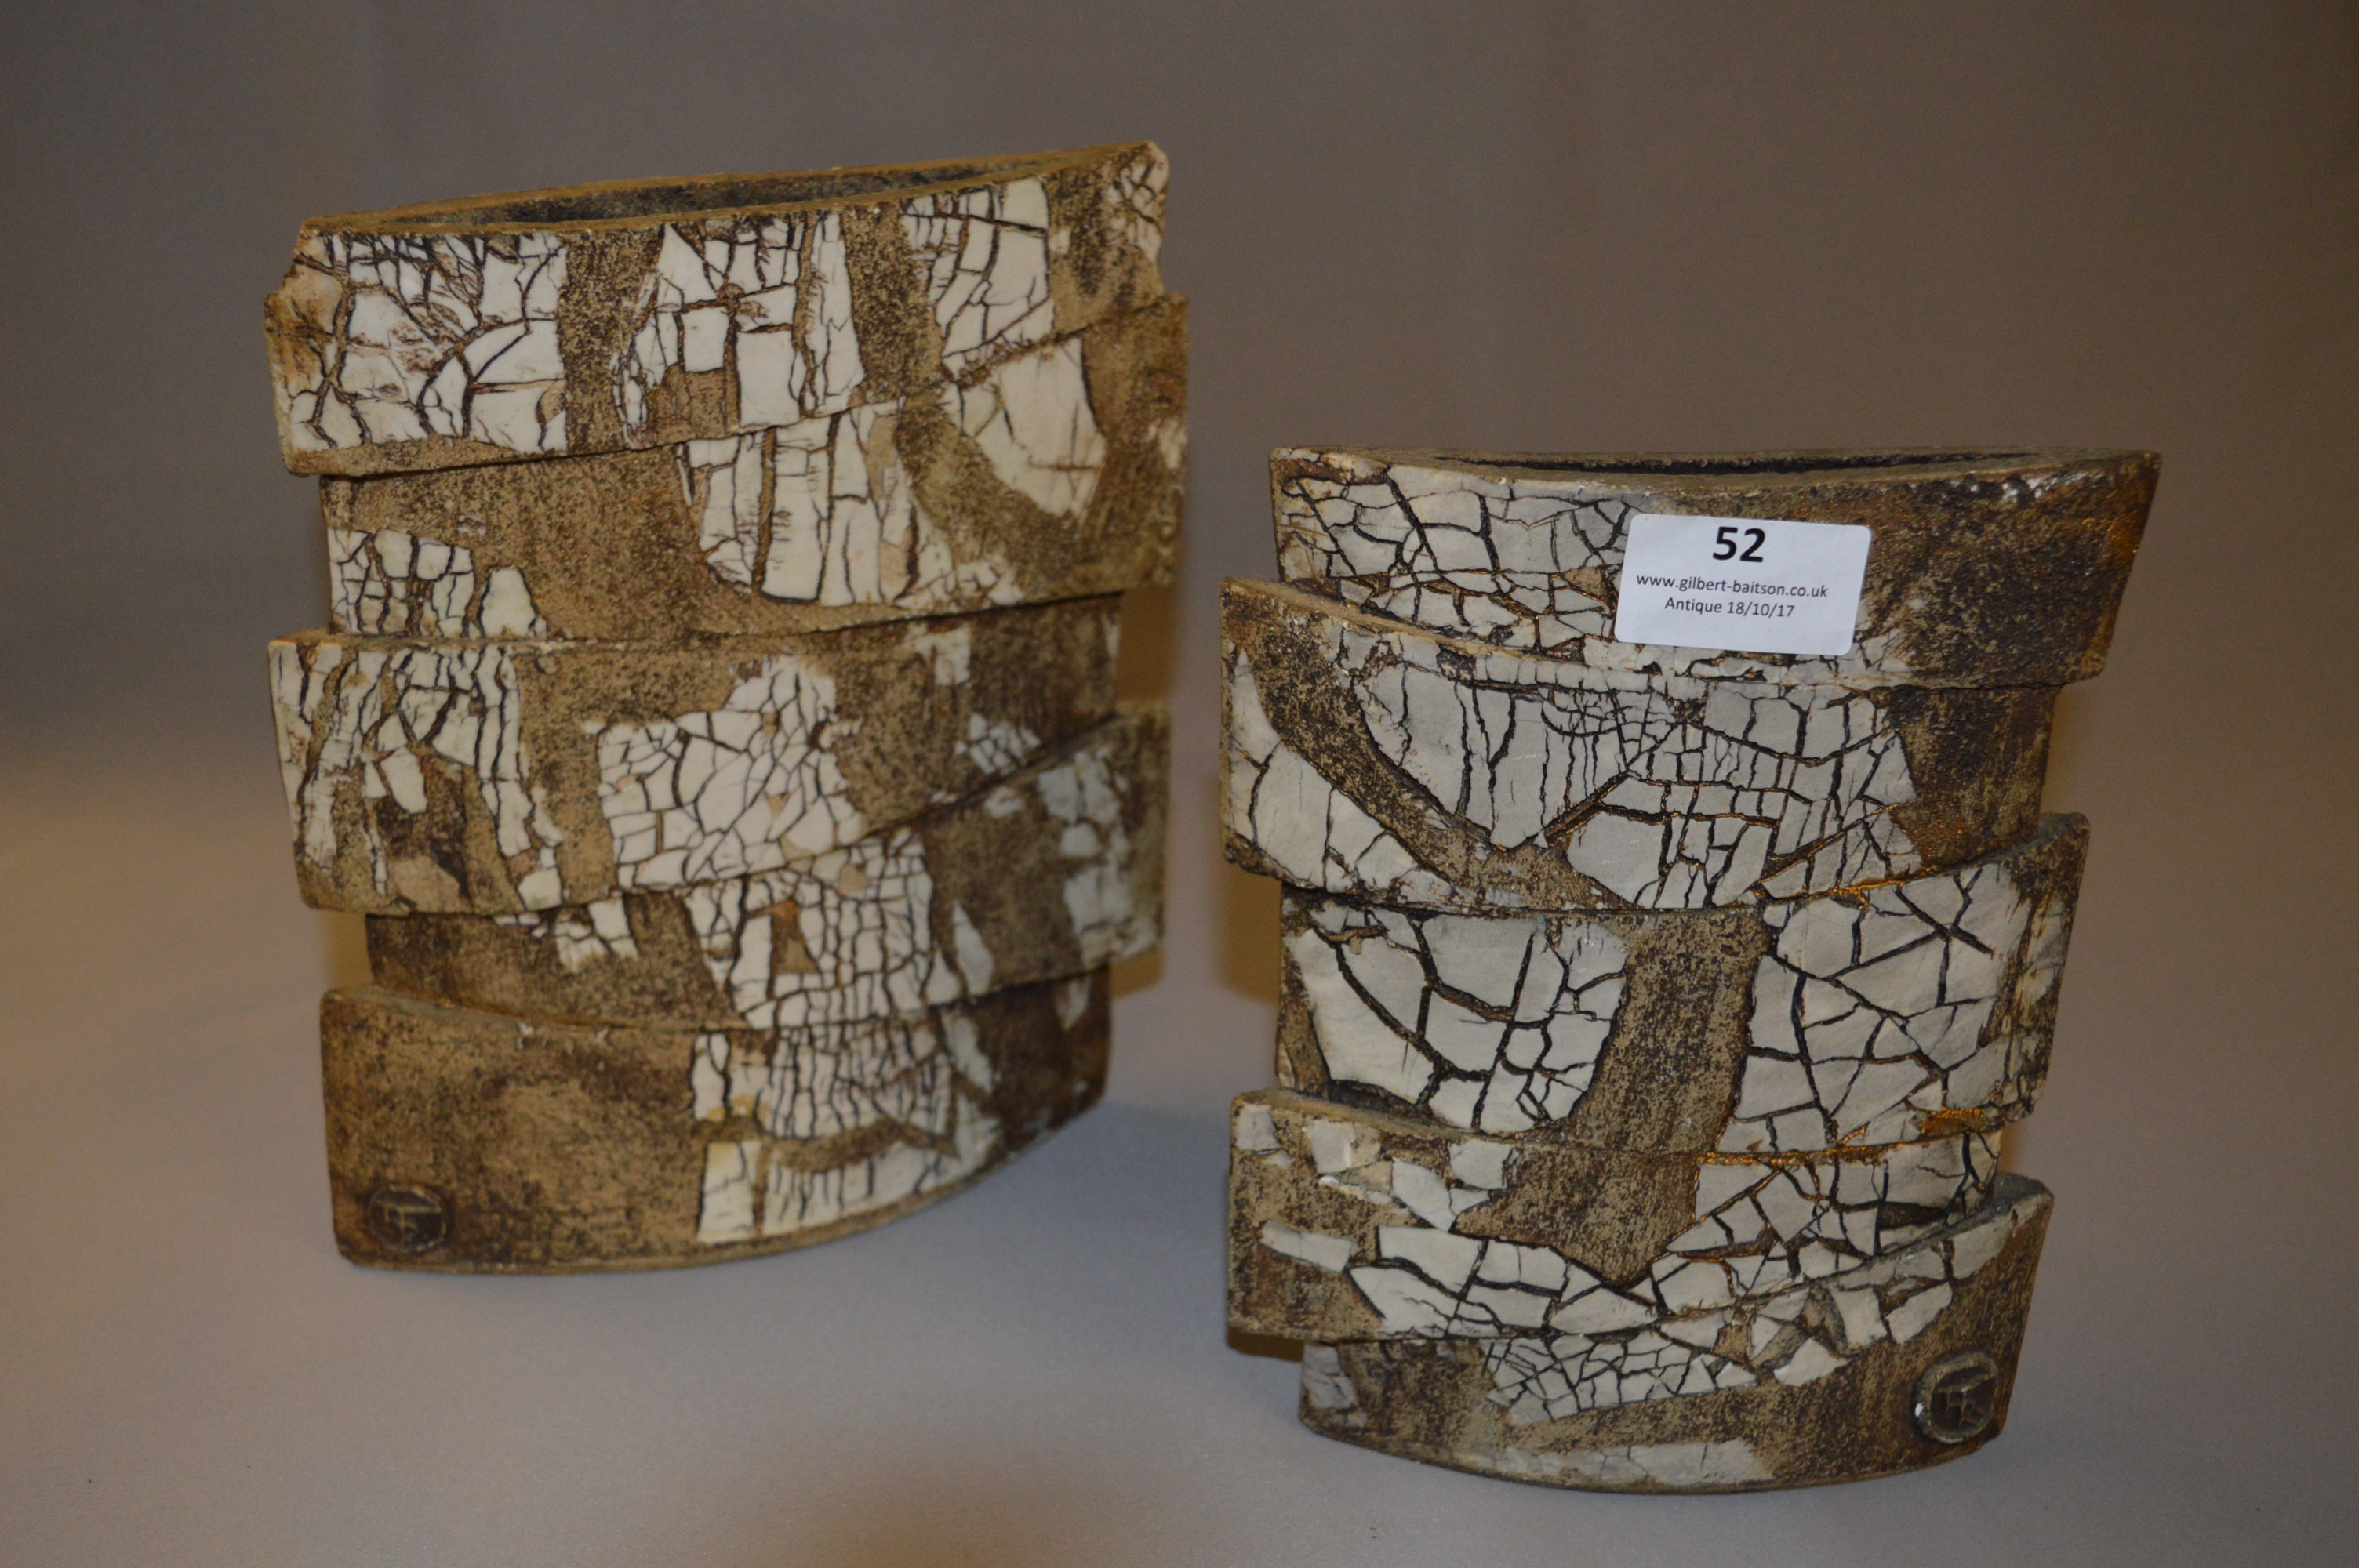 Studio Pottery Vases in Form of Silver Birch Logs